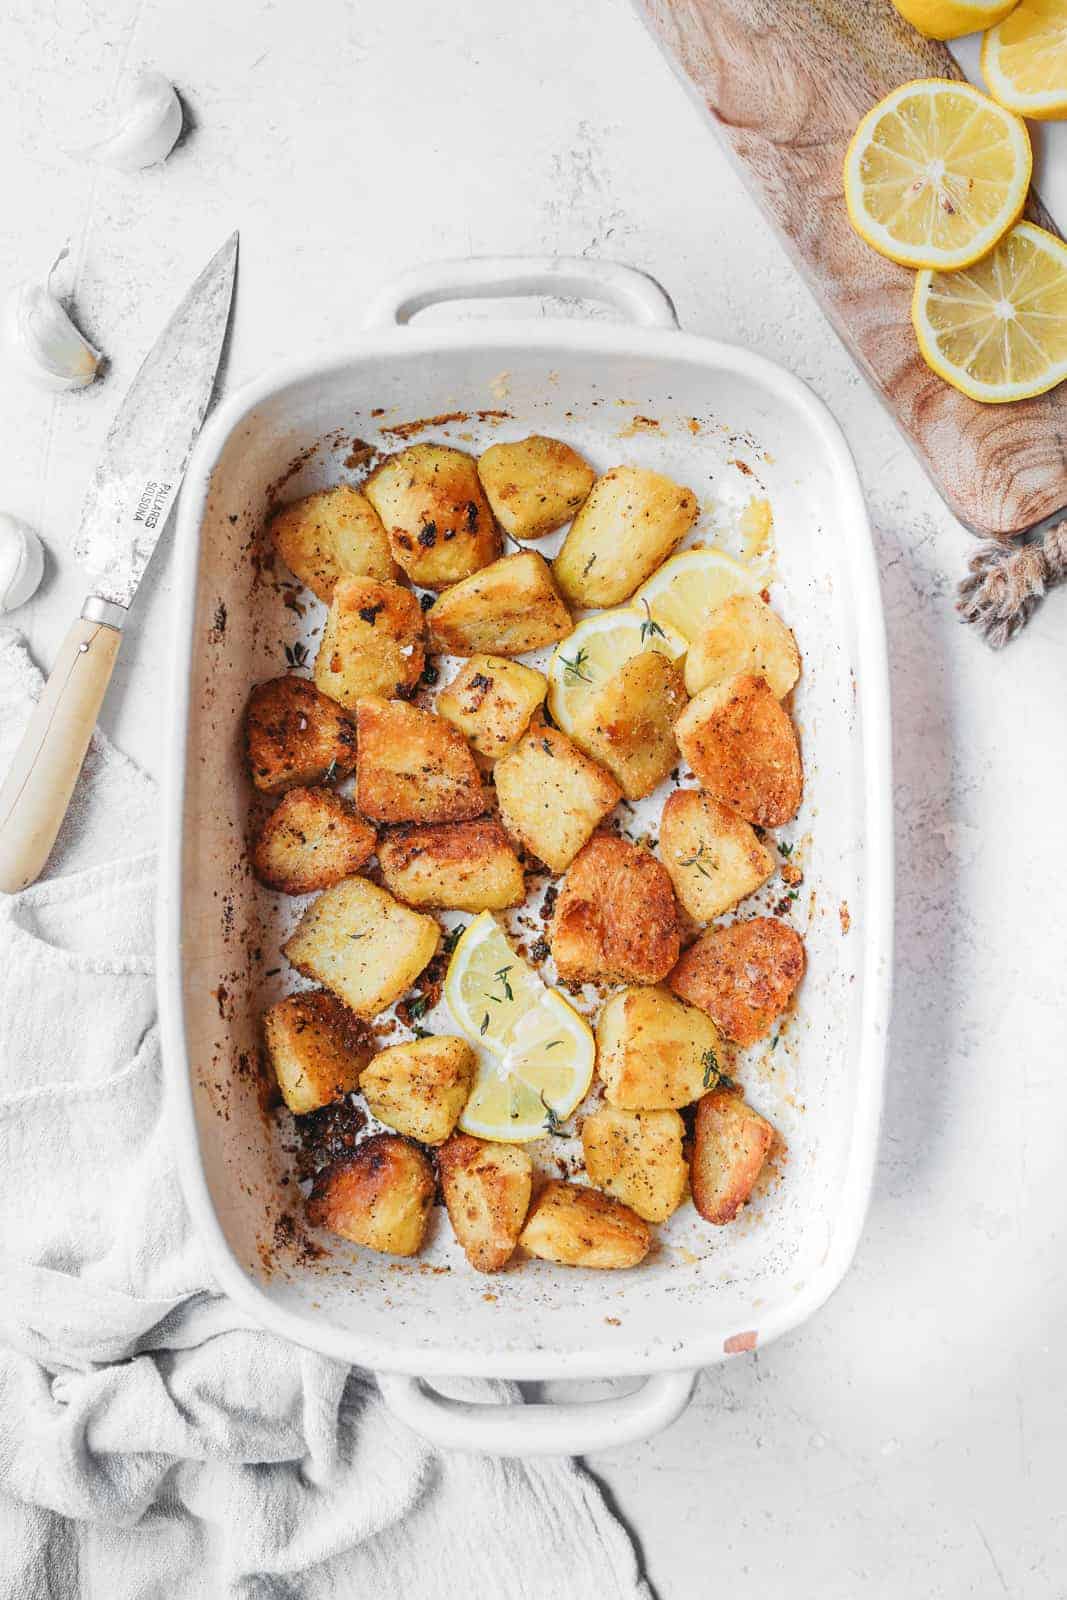 Baking dish with the finished crispy roasted potatoes in it, thyme has just been added and potatoes are ready to serve.  